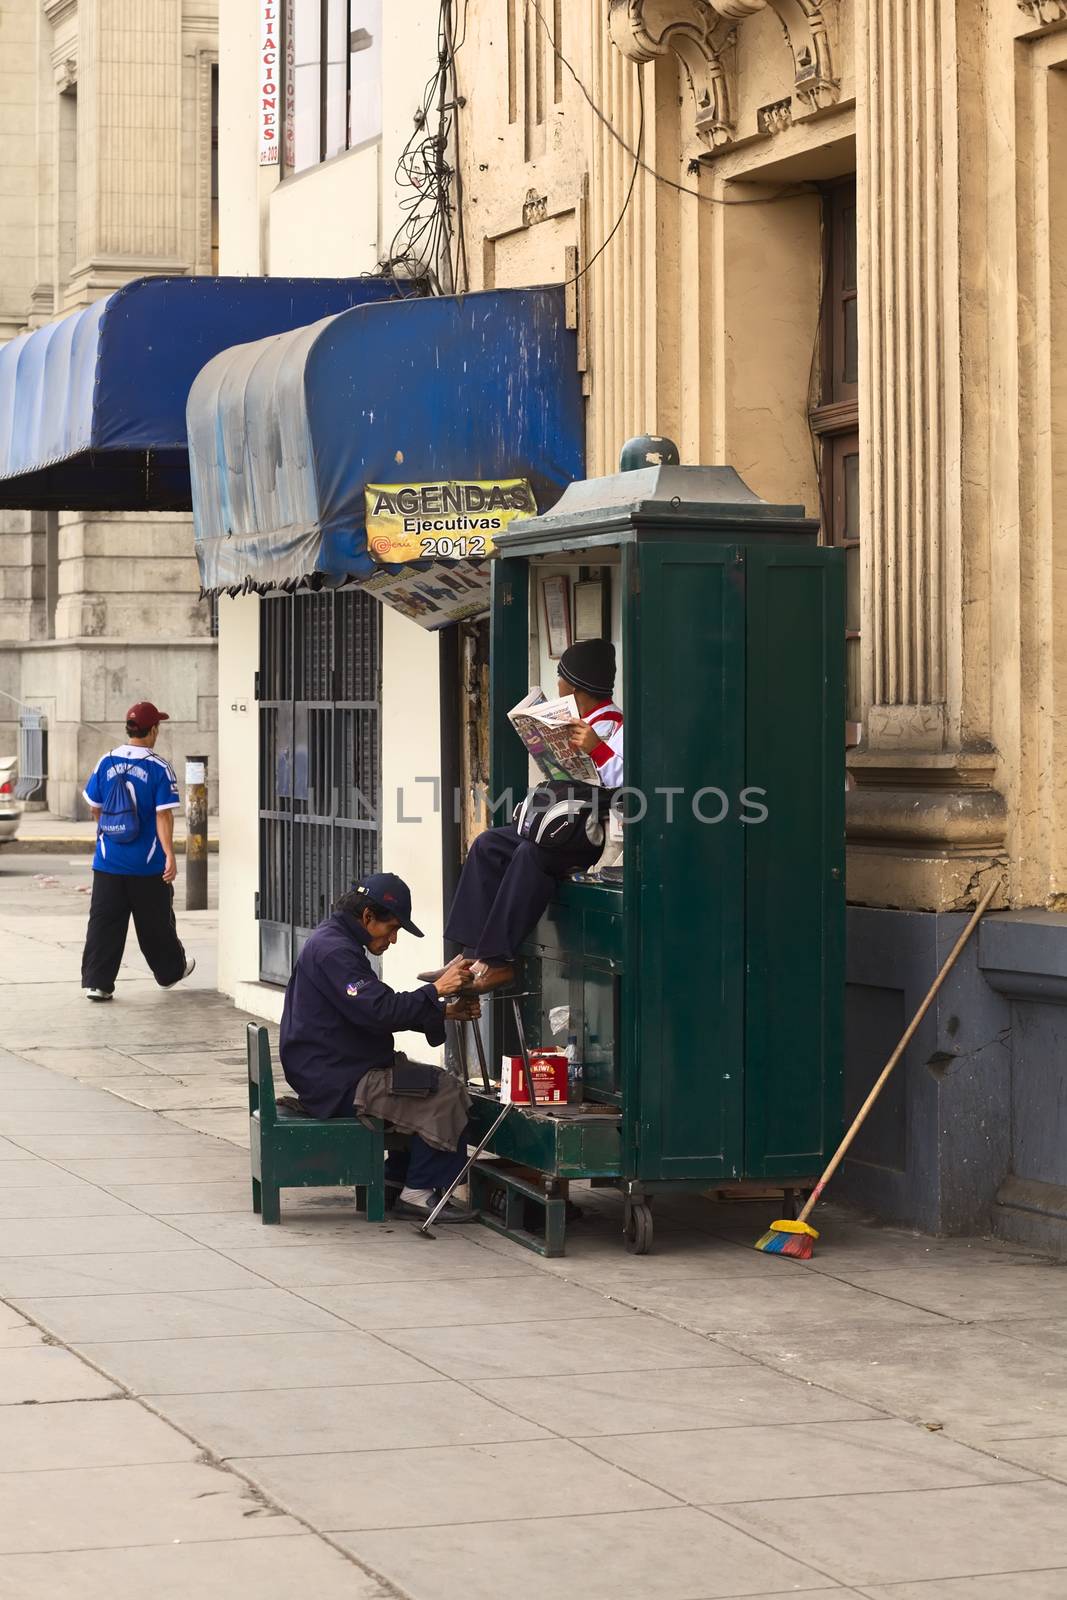 LIMA, PERU - JULY 21, 2013: Unidentified man cleaning the shoes of another person in the city center on July 21, 2013 in Lima, Peru. There are many people on the streets of Lima cleaning shoes.